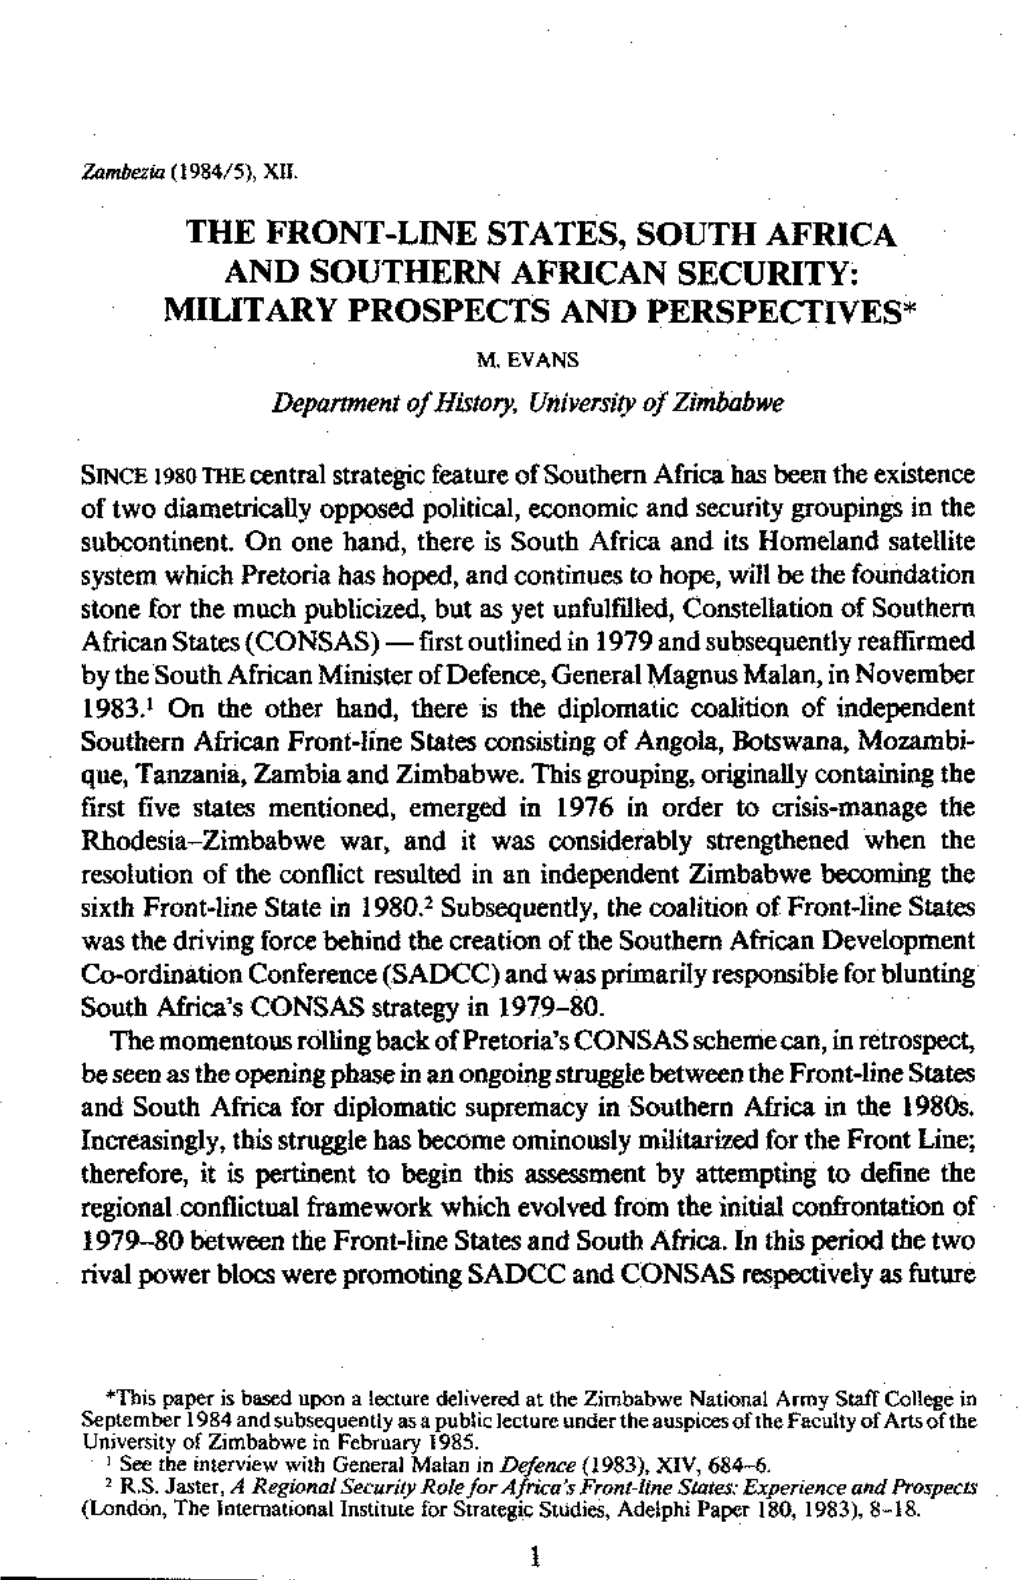 Frontline States of Southern Africa: the Case for Closer Co-Operation', Atlantic Quarterly (1984), II, 67-87